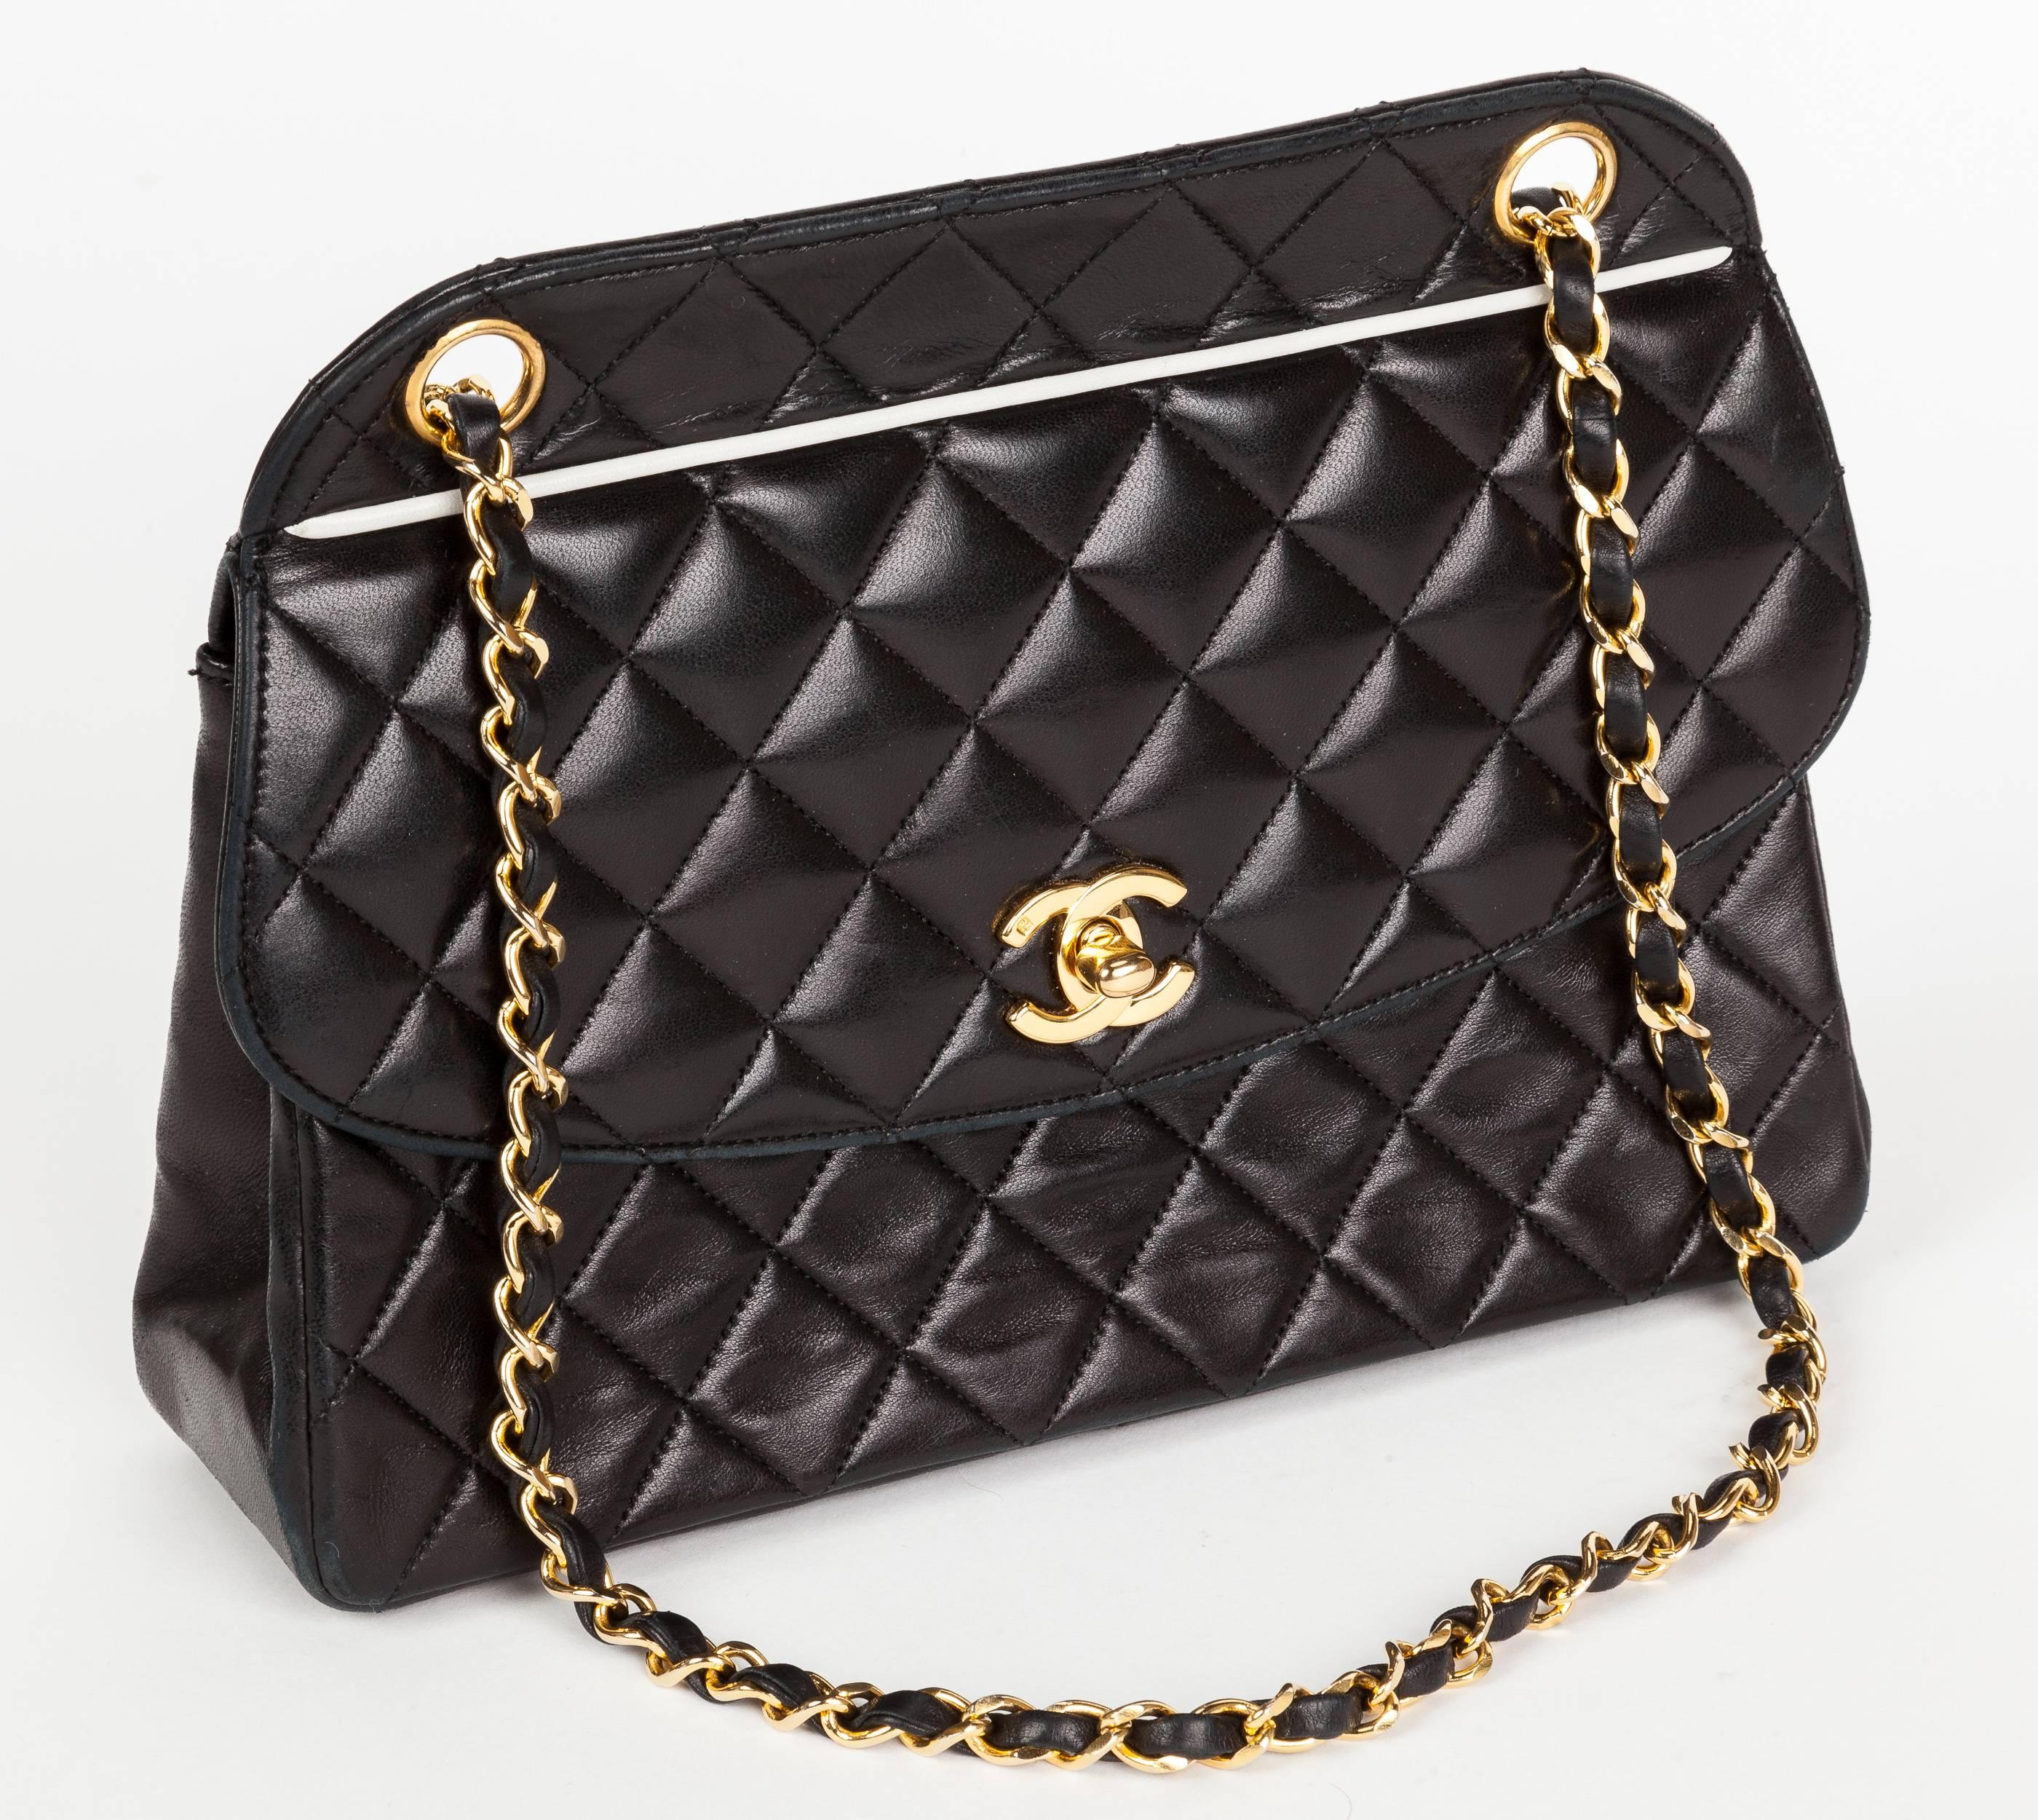 A 1991 Chanel quilted soft calfskin leather handbag with double chain shoulder strap, gold tone hardware, turn lock fastener and white leather trim both at front and back exterior pocket edge. Opens to one main compartment with side pocket. Stamped